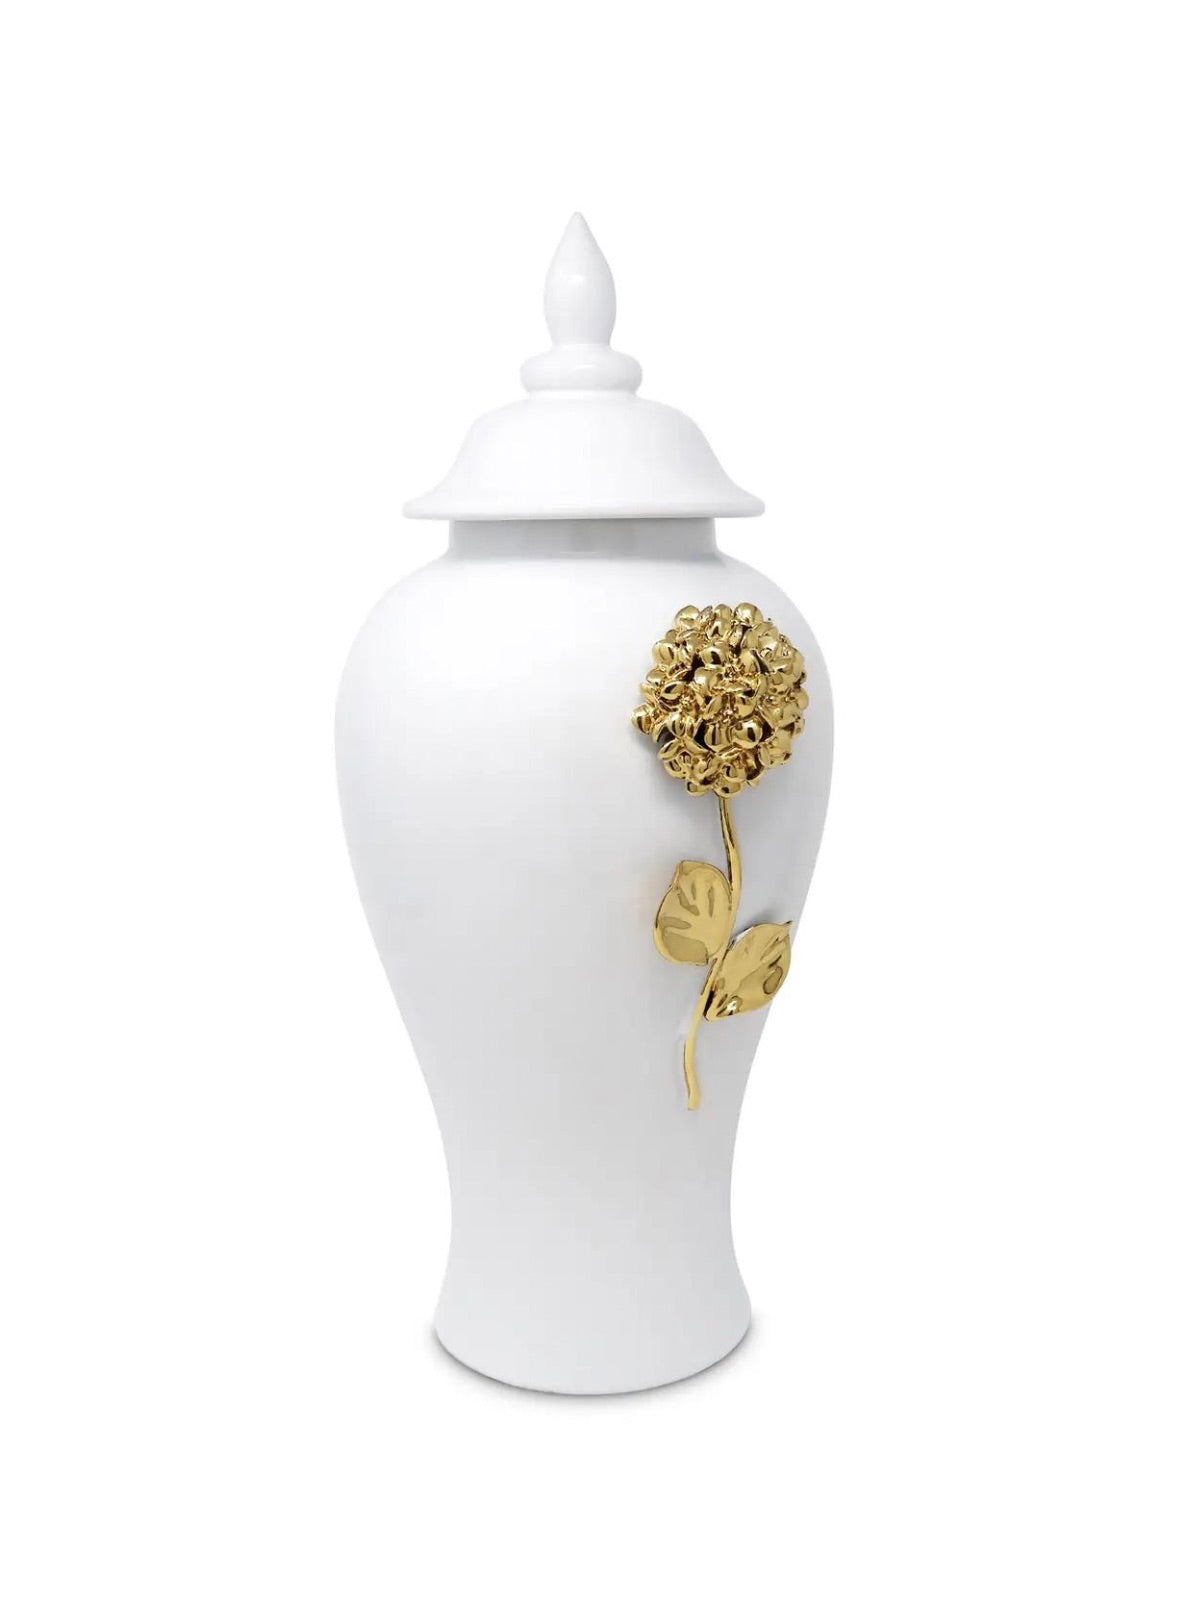 White Ceramic Ginger Jar with Sparkling Gold Flower Detail - Available in Large.